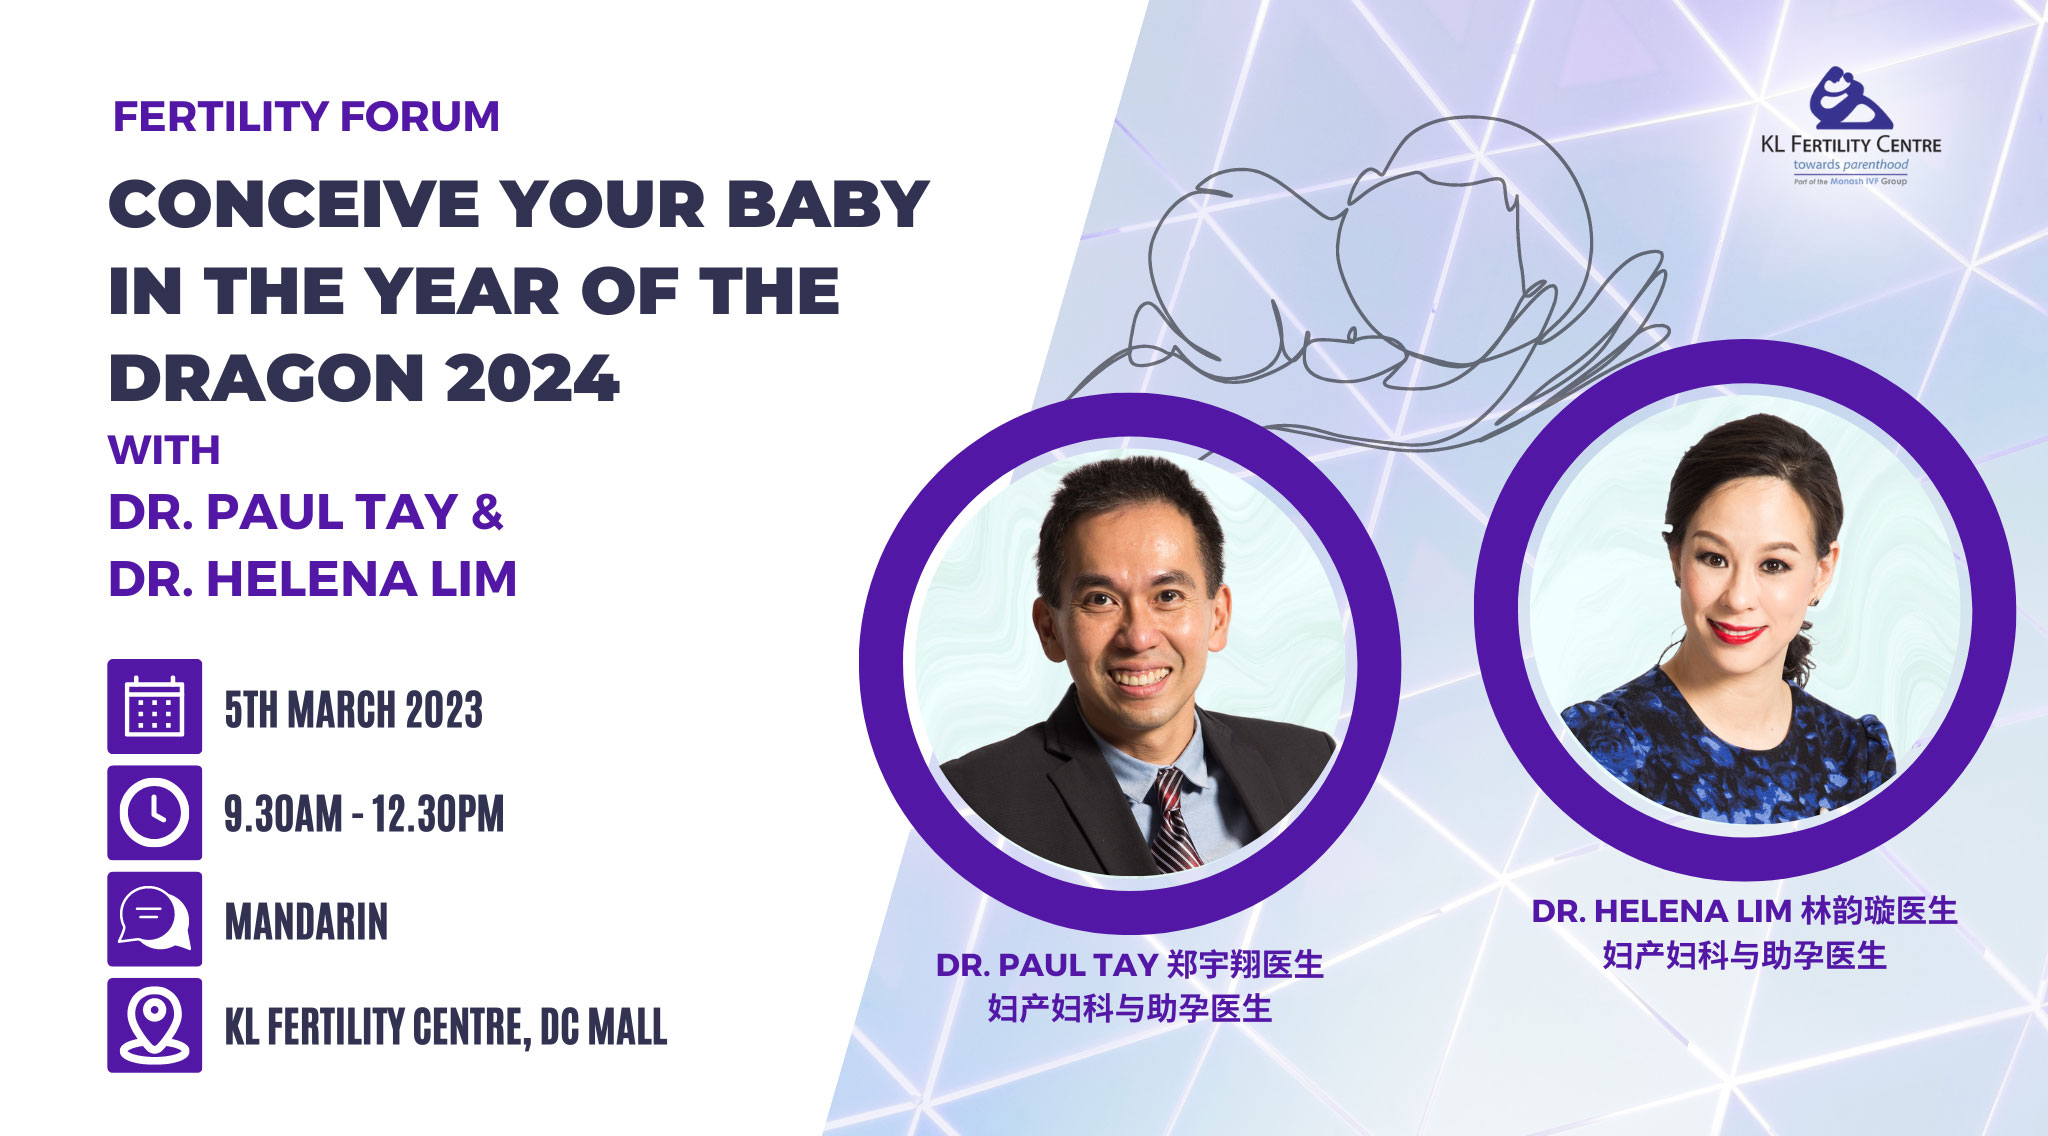 Fertility Forum March 05, 2023 - CONCEIVE YOUR BABY IN THE YEAR OF THE DRAGON - Dr. Paul Tay & Dr. Helena Lim